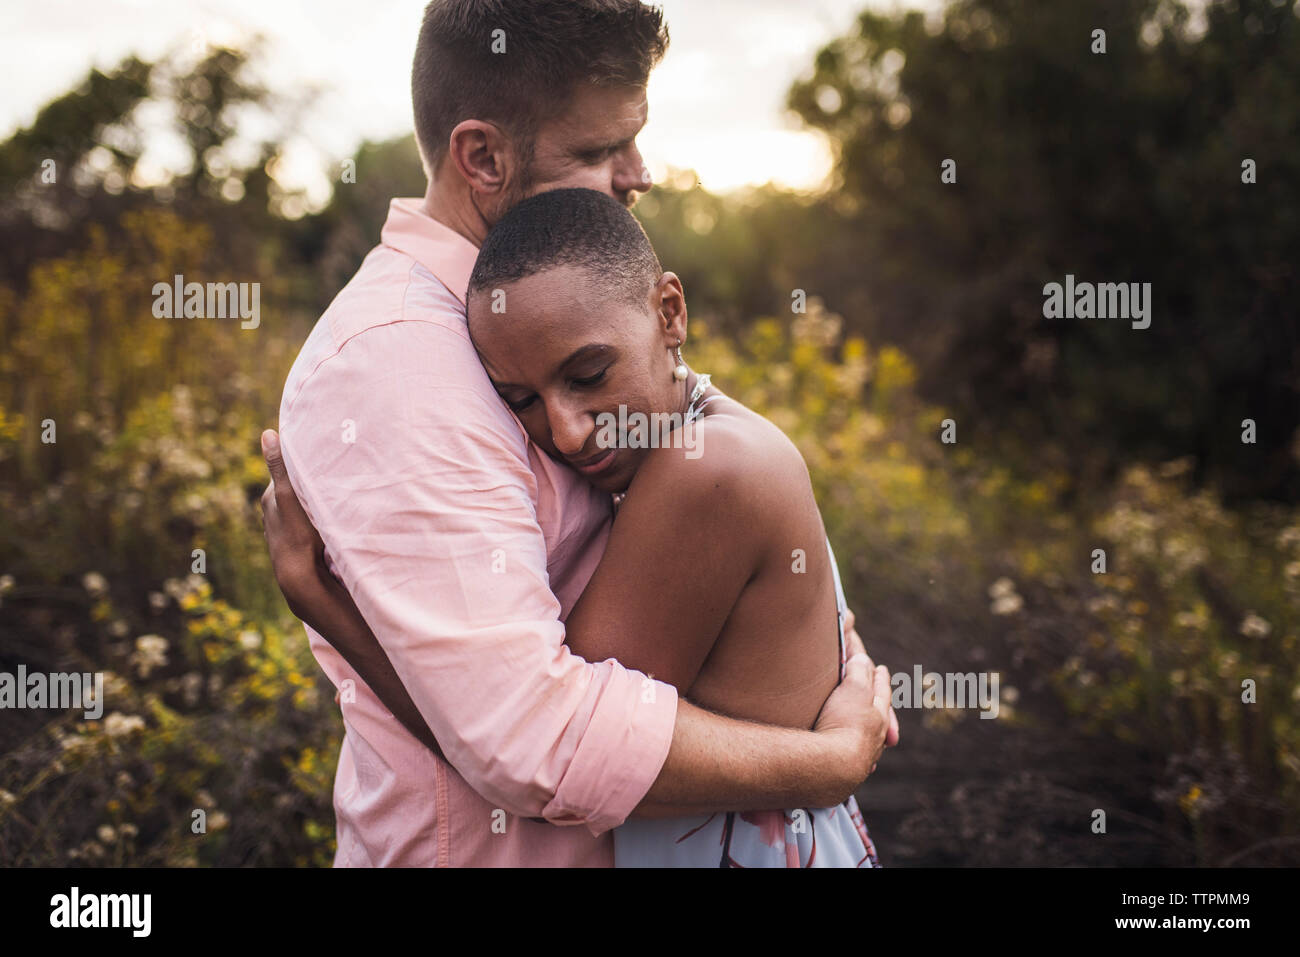 Side view of romantic couple embracing against plants in park during sunset Stock Photo